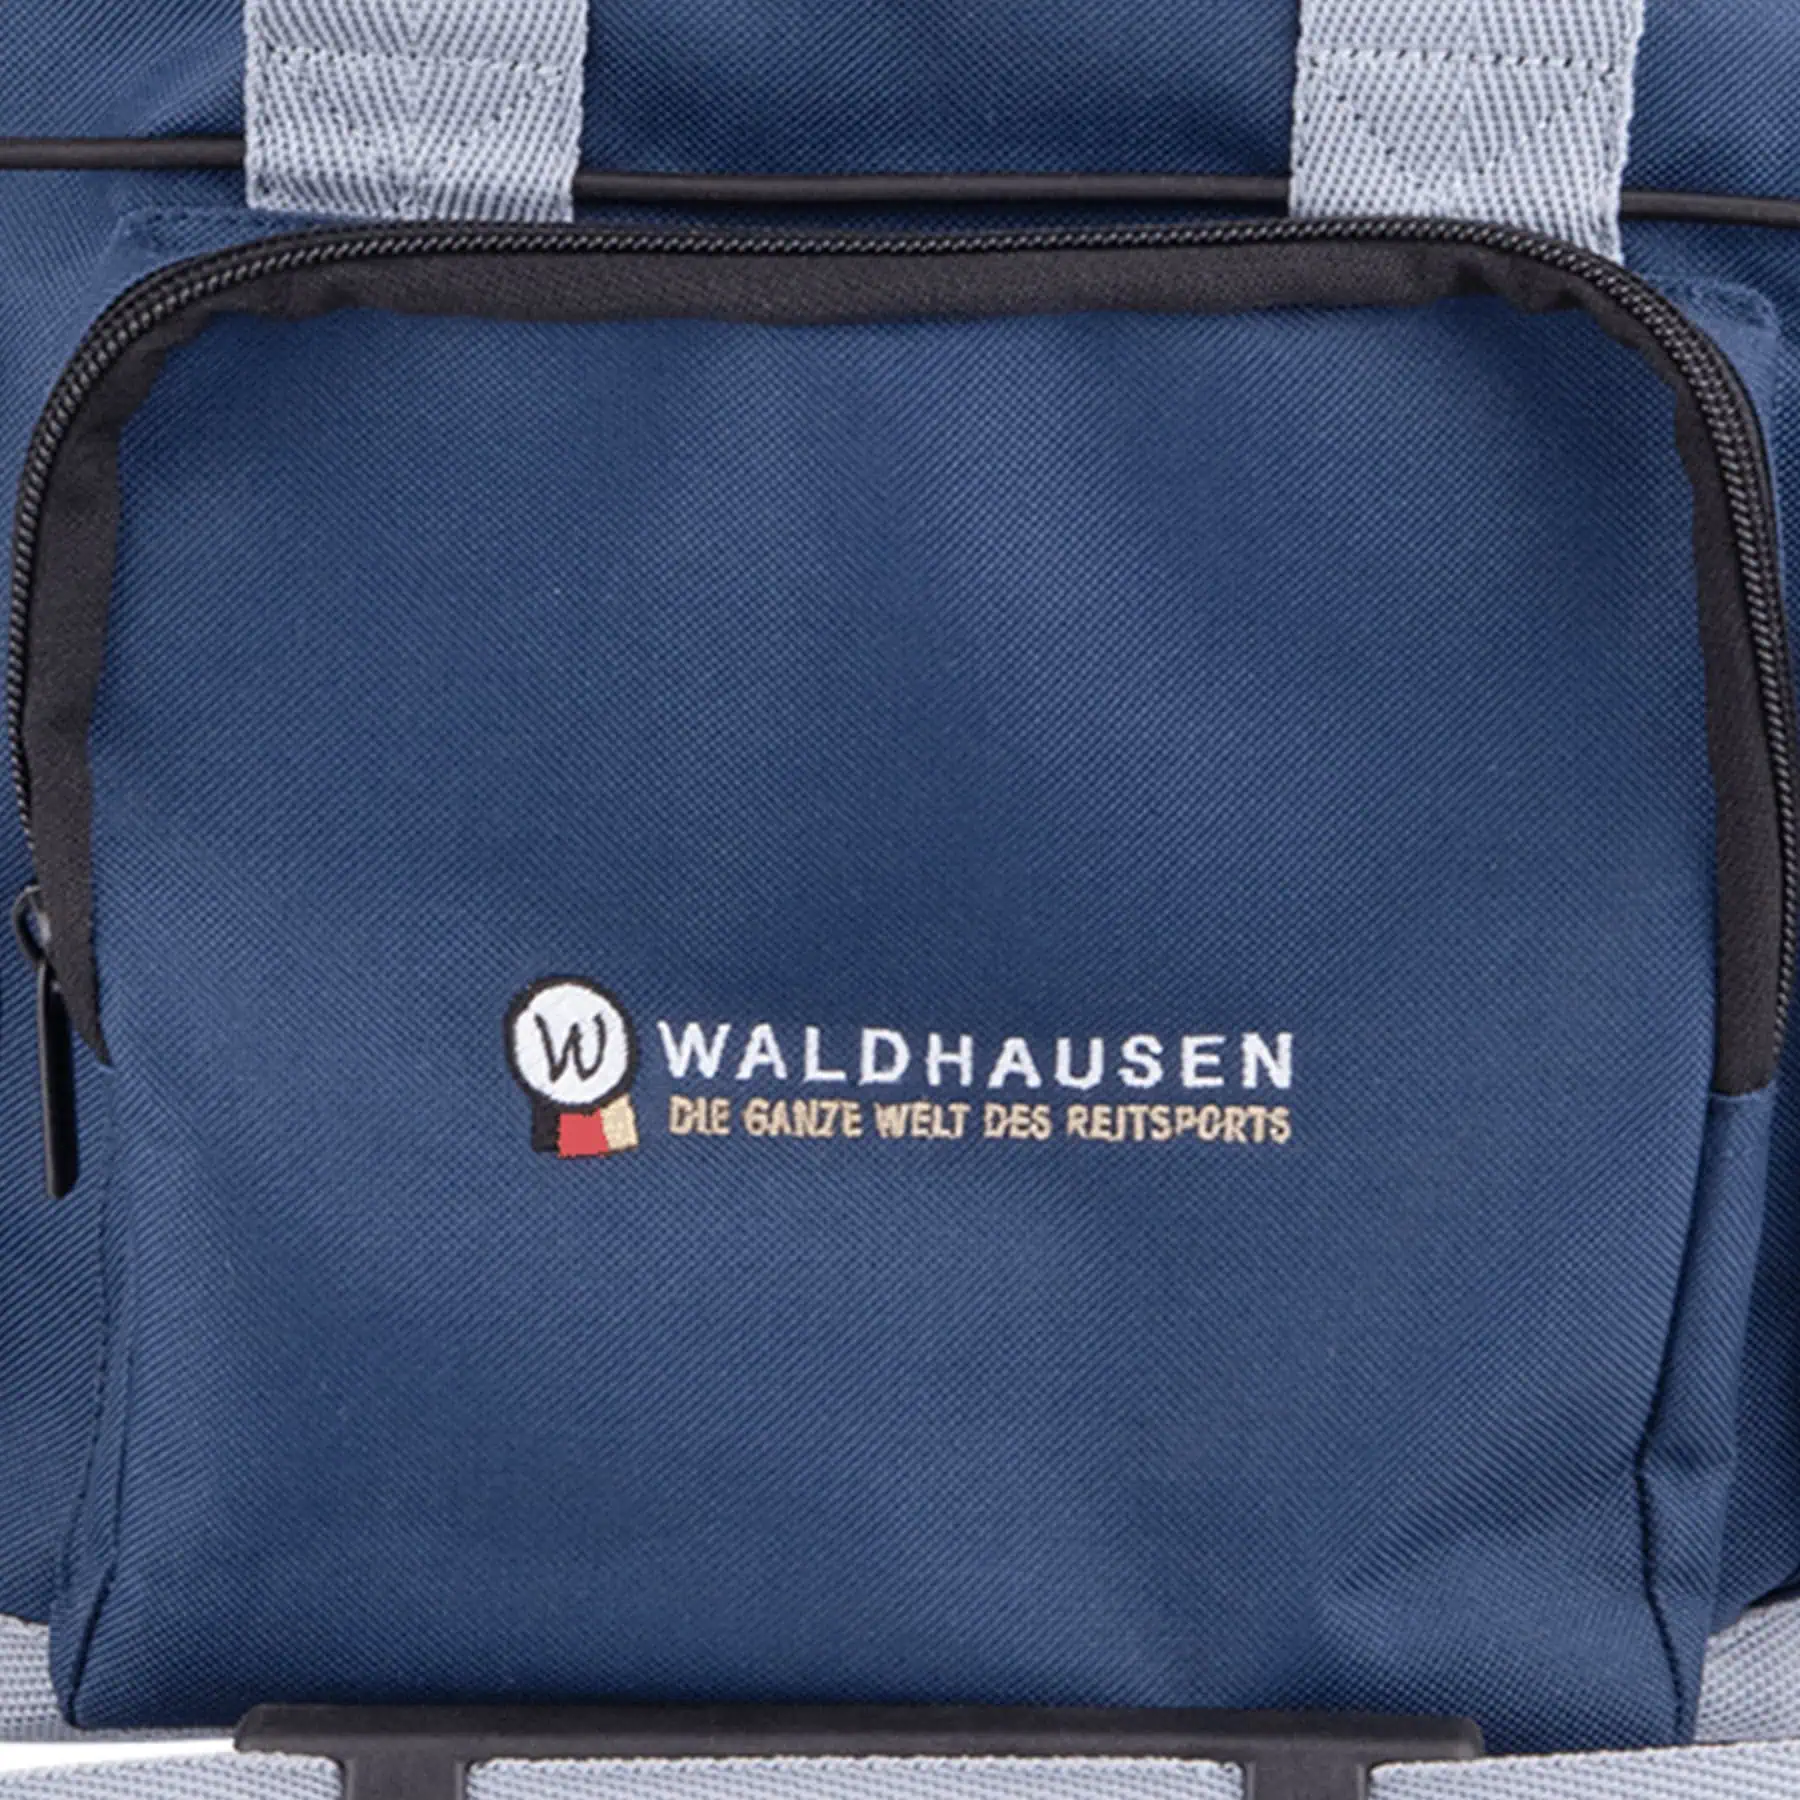 Grooming and Competition Bag